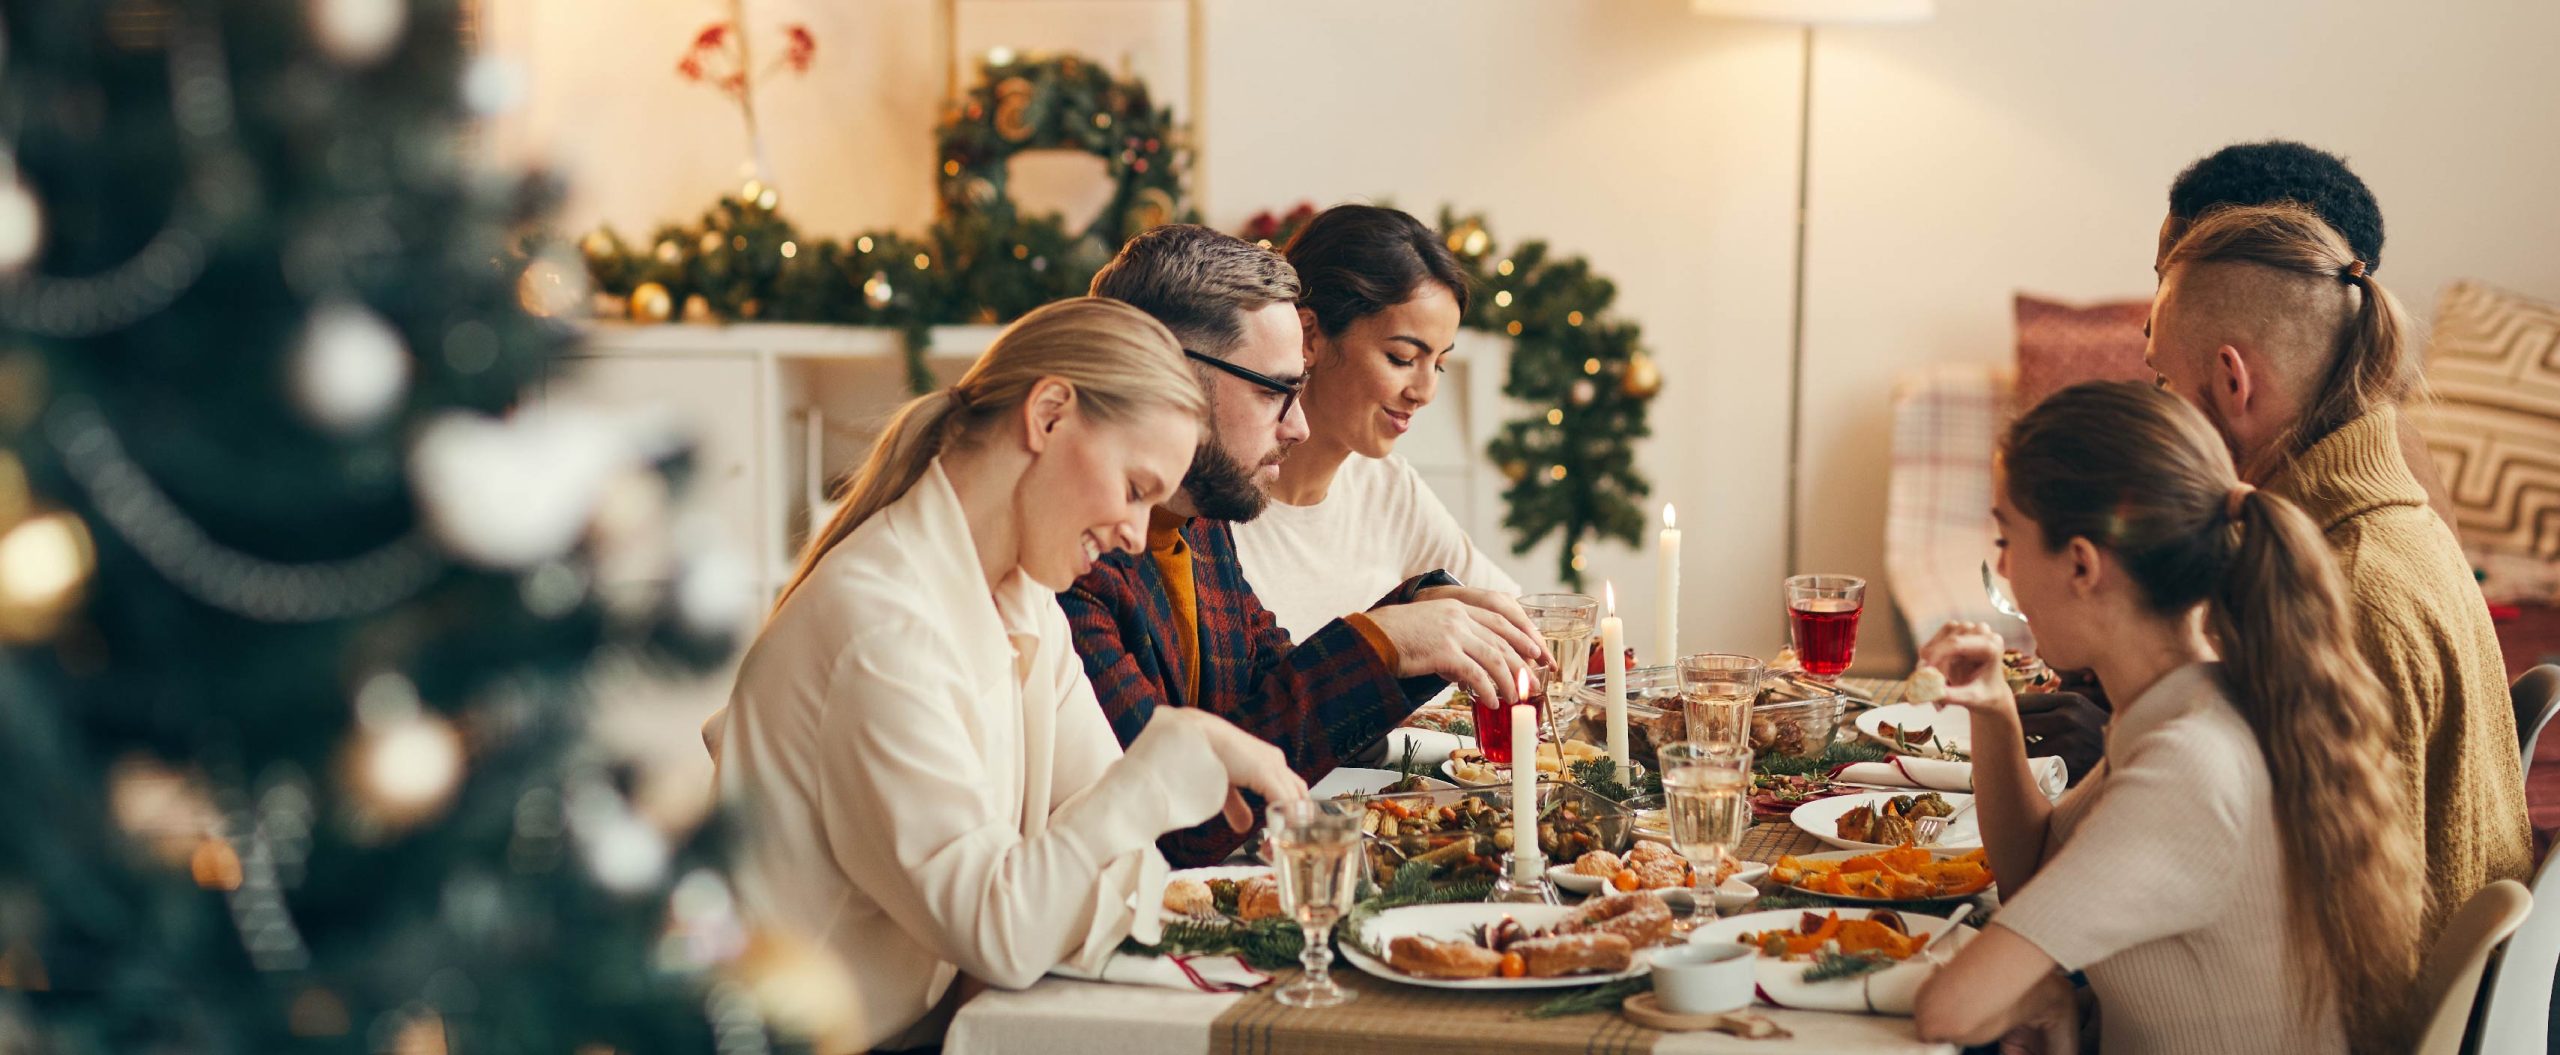 family eating a meal together at festive table